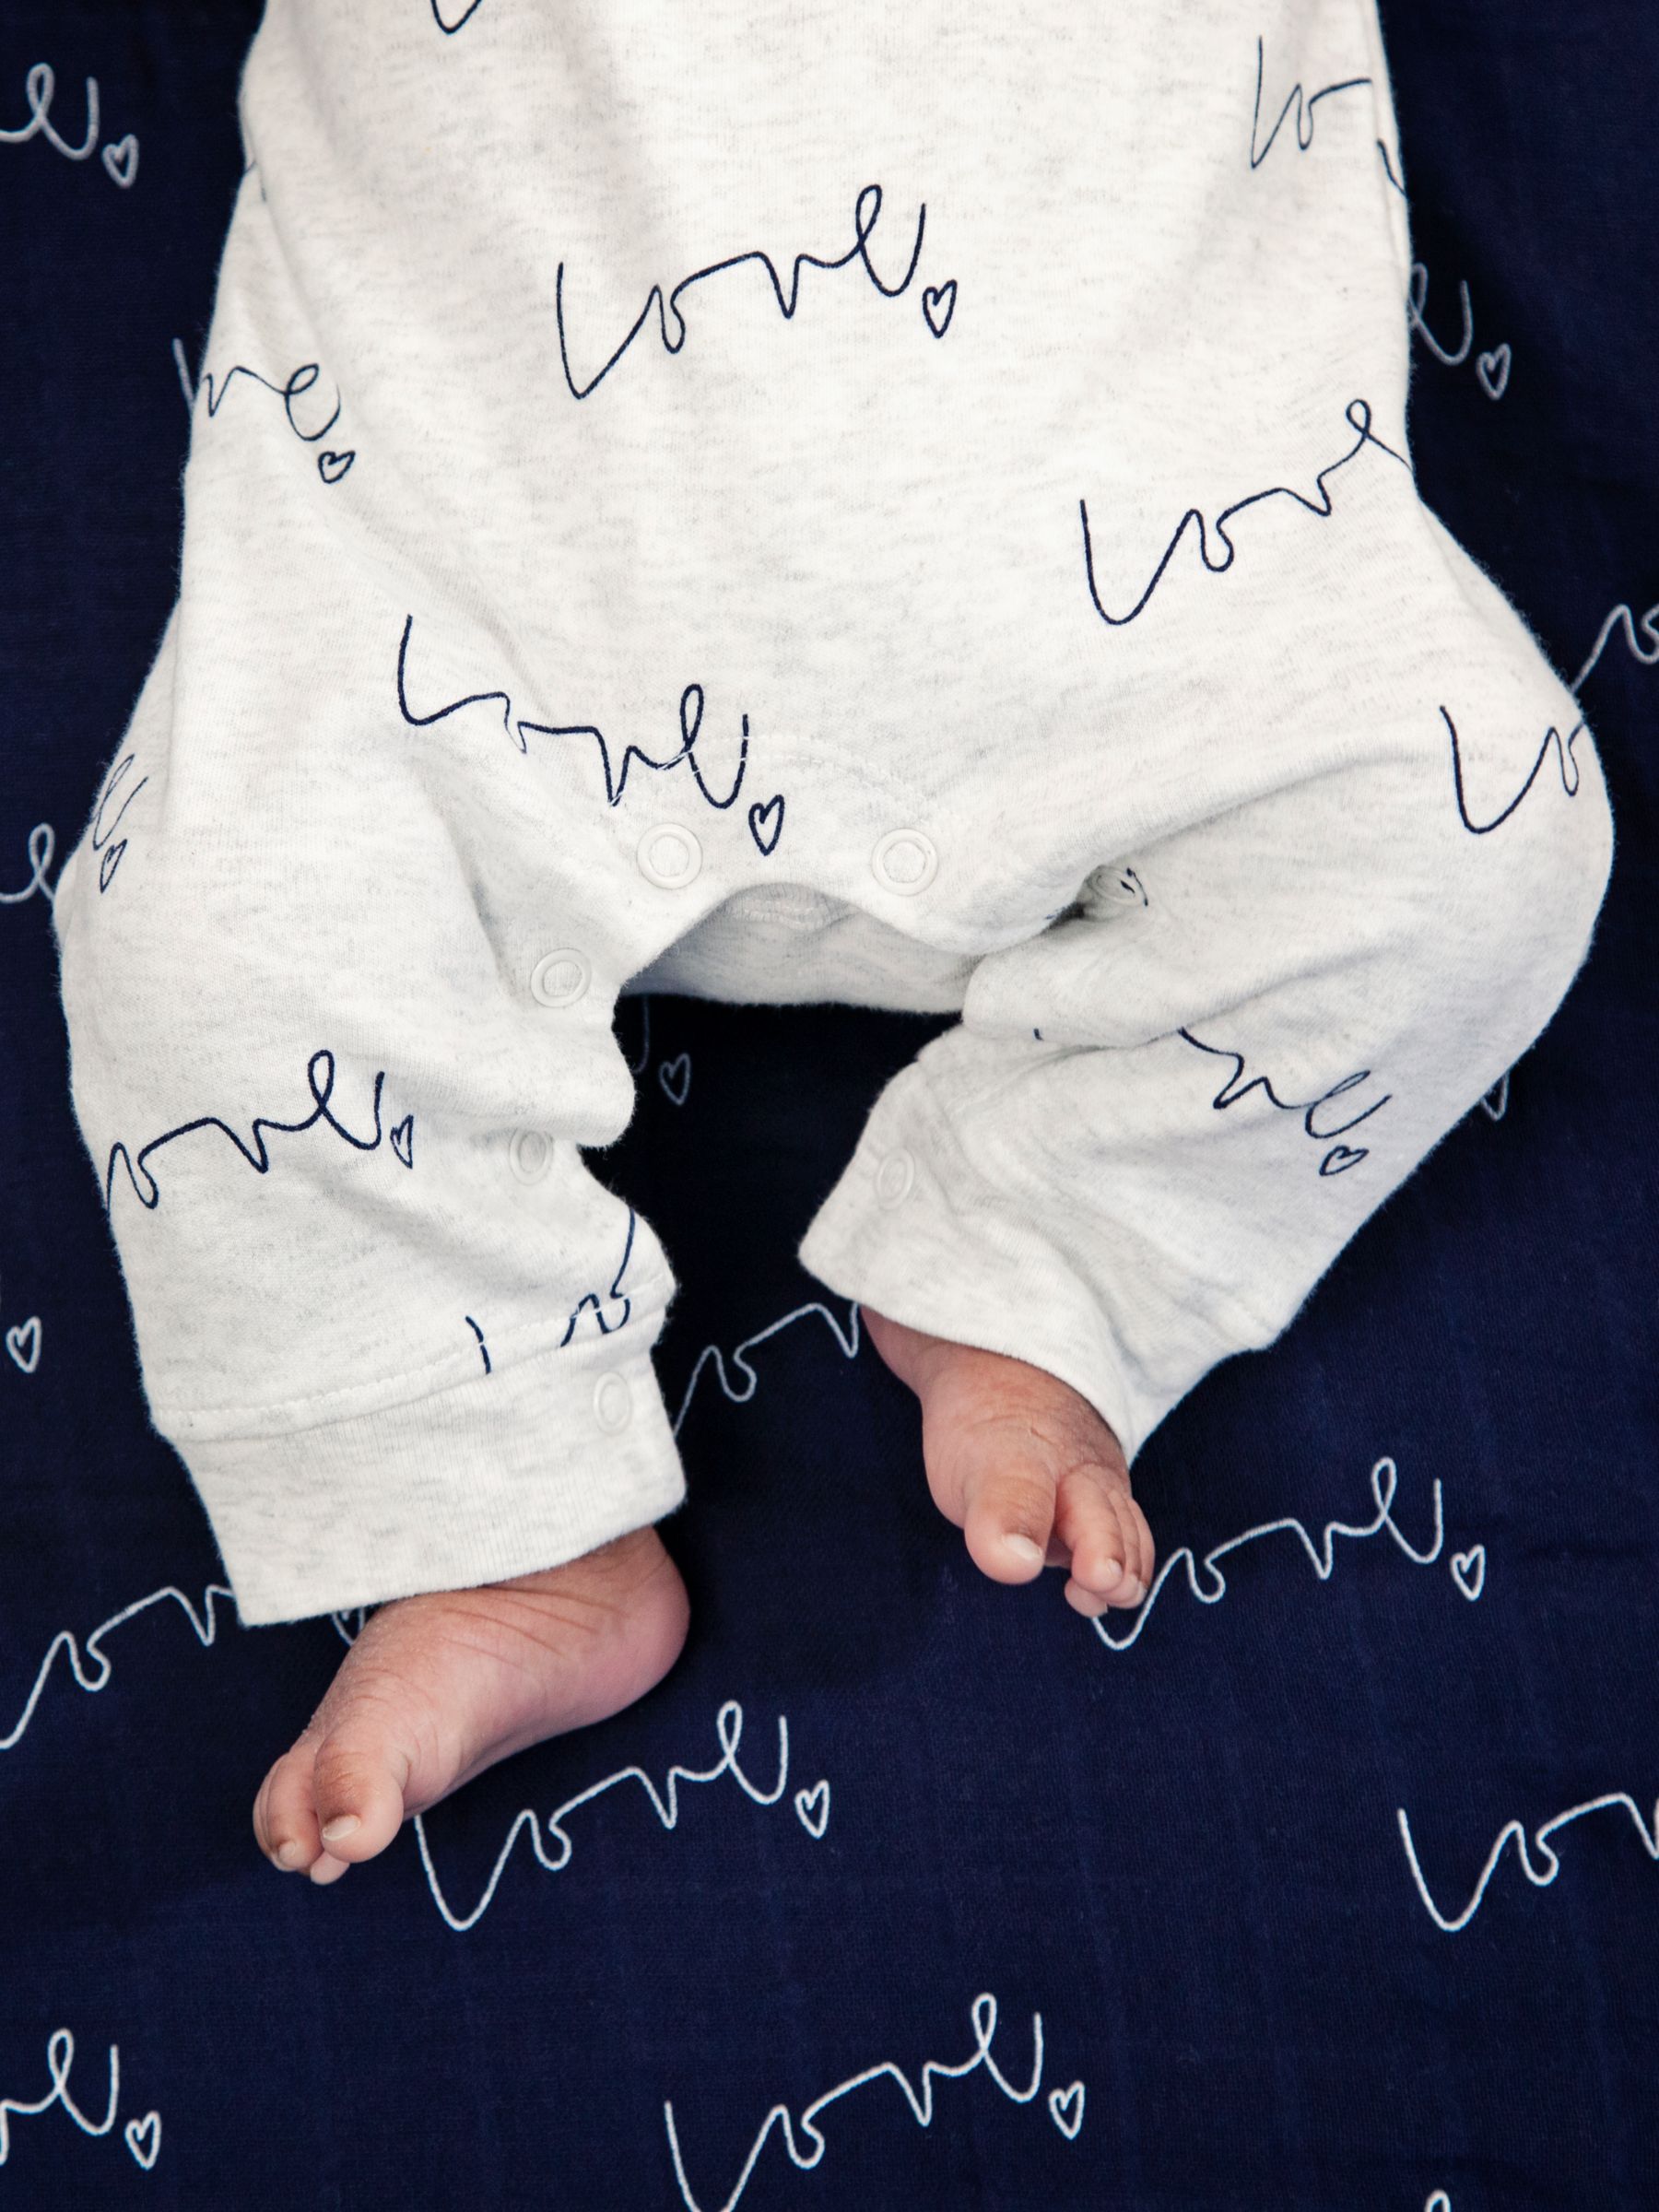 From Babies with Love Love Script Long Sleeve Baby Grow, Grey, 0-3 months